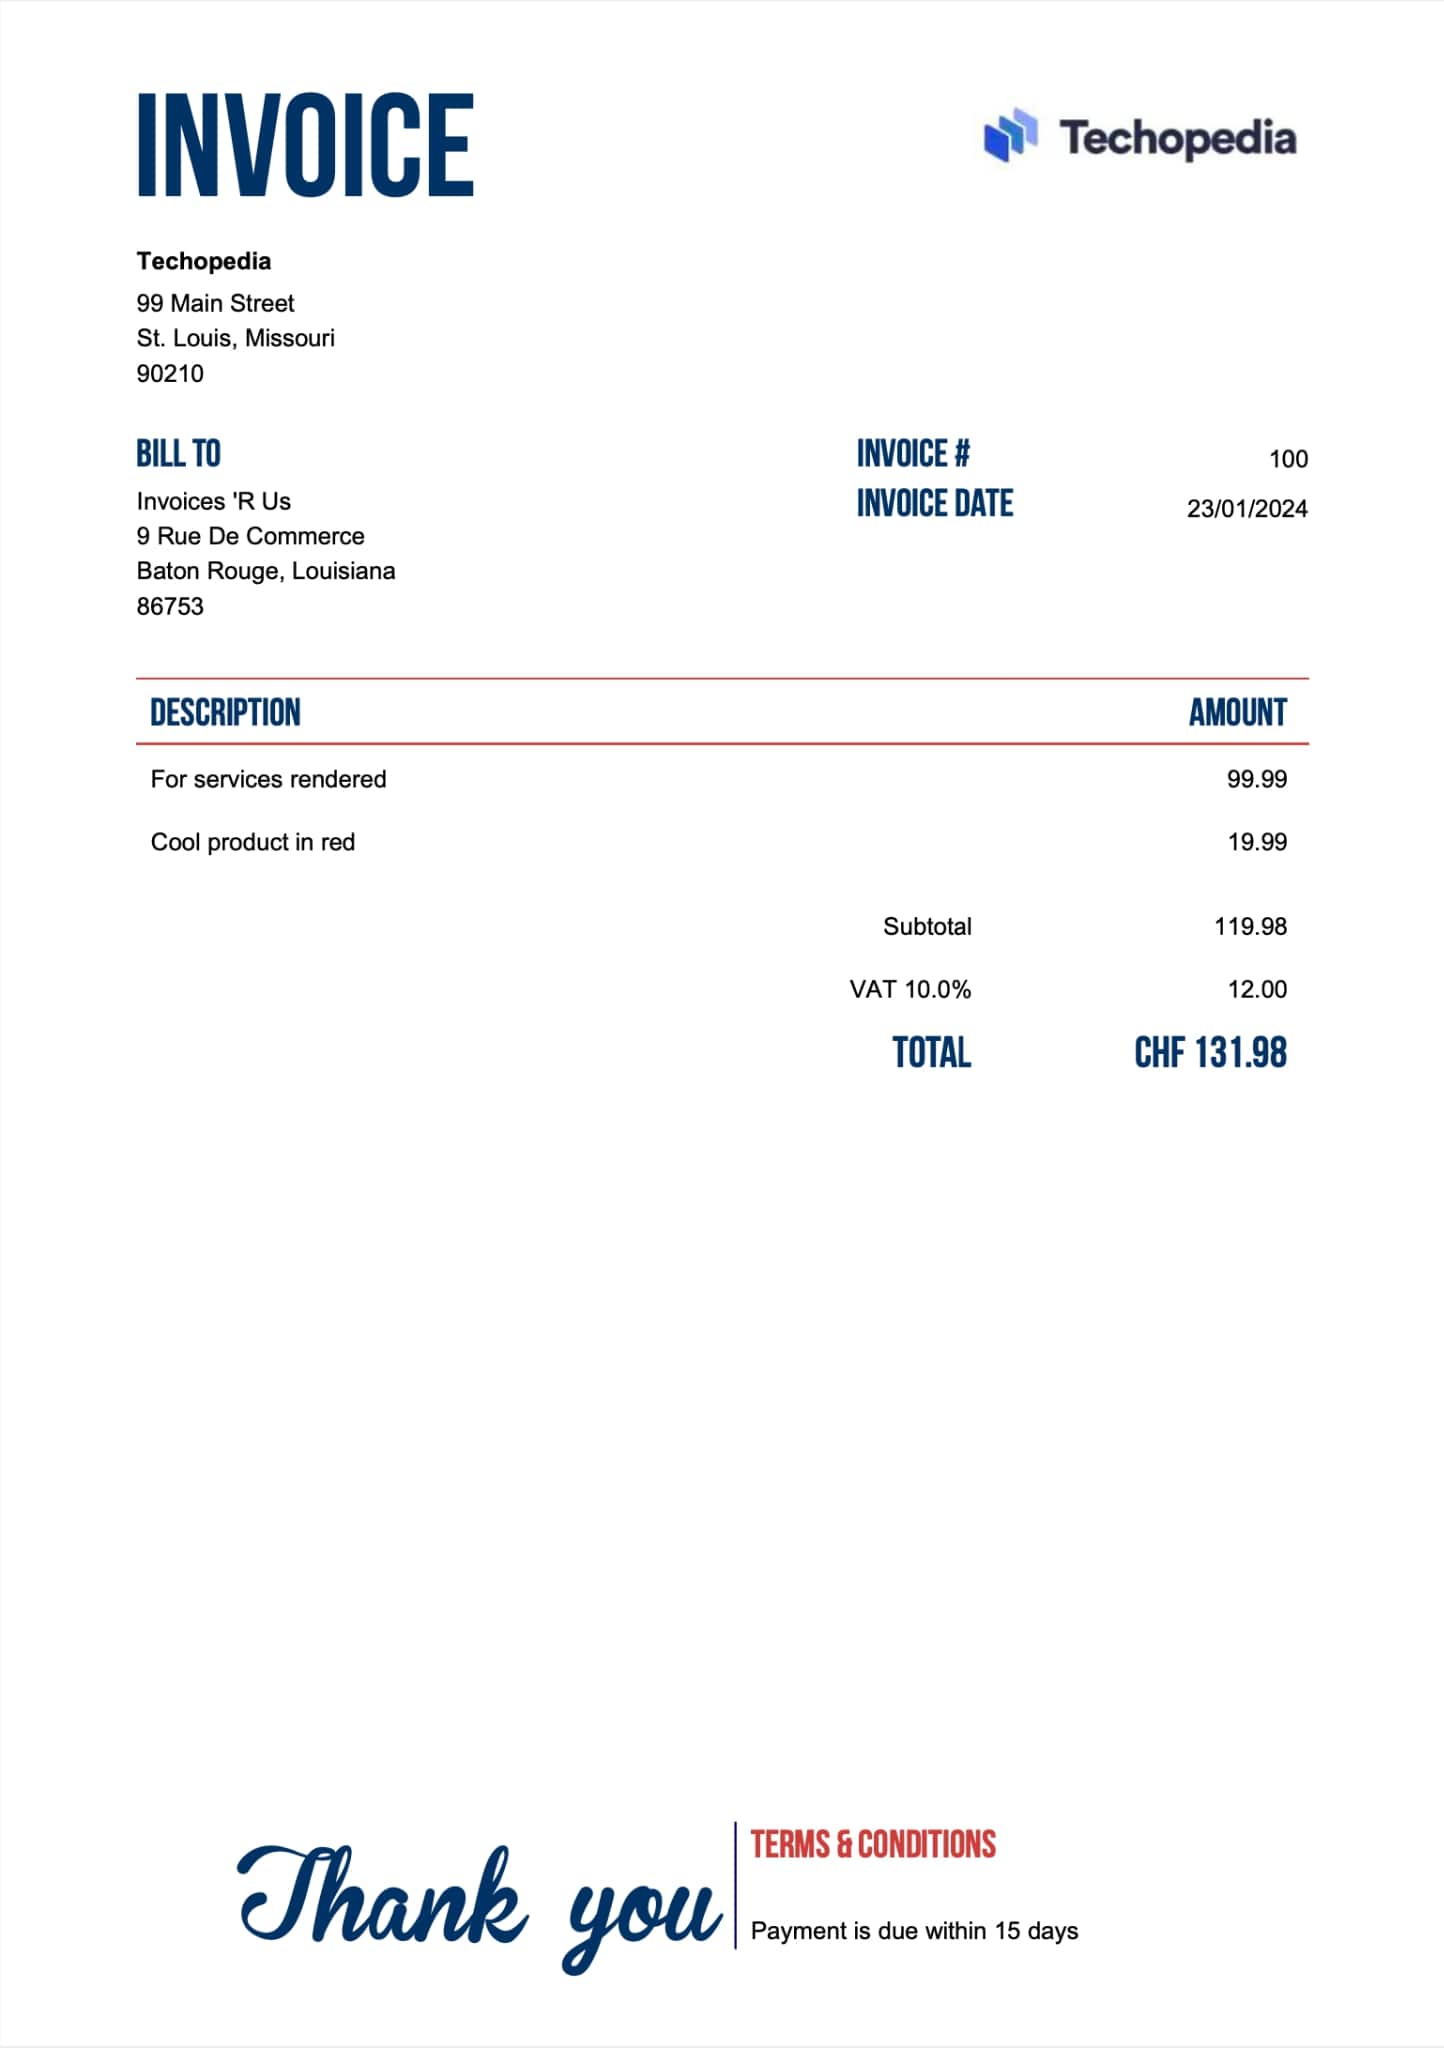 An example of an invoice